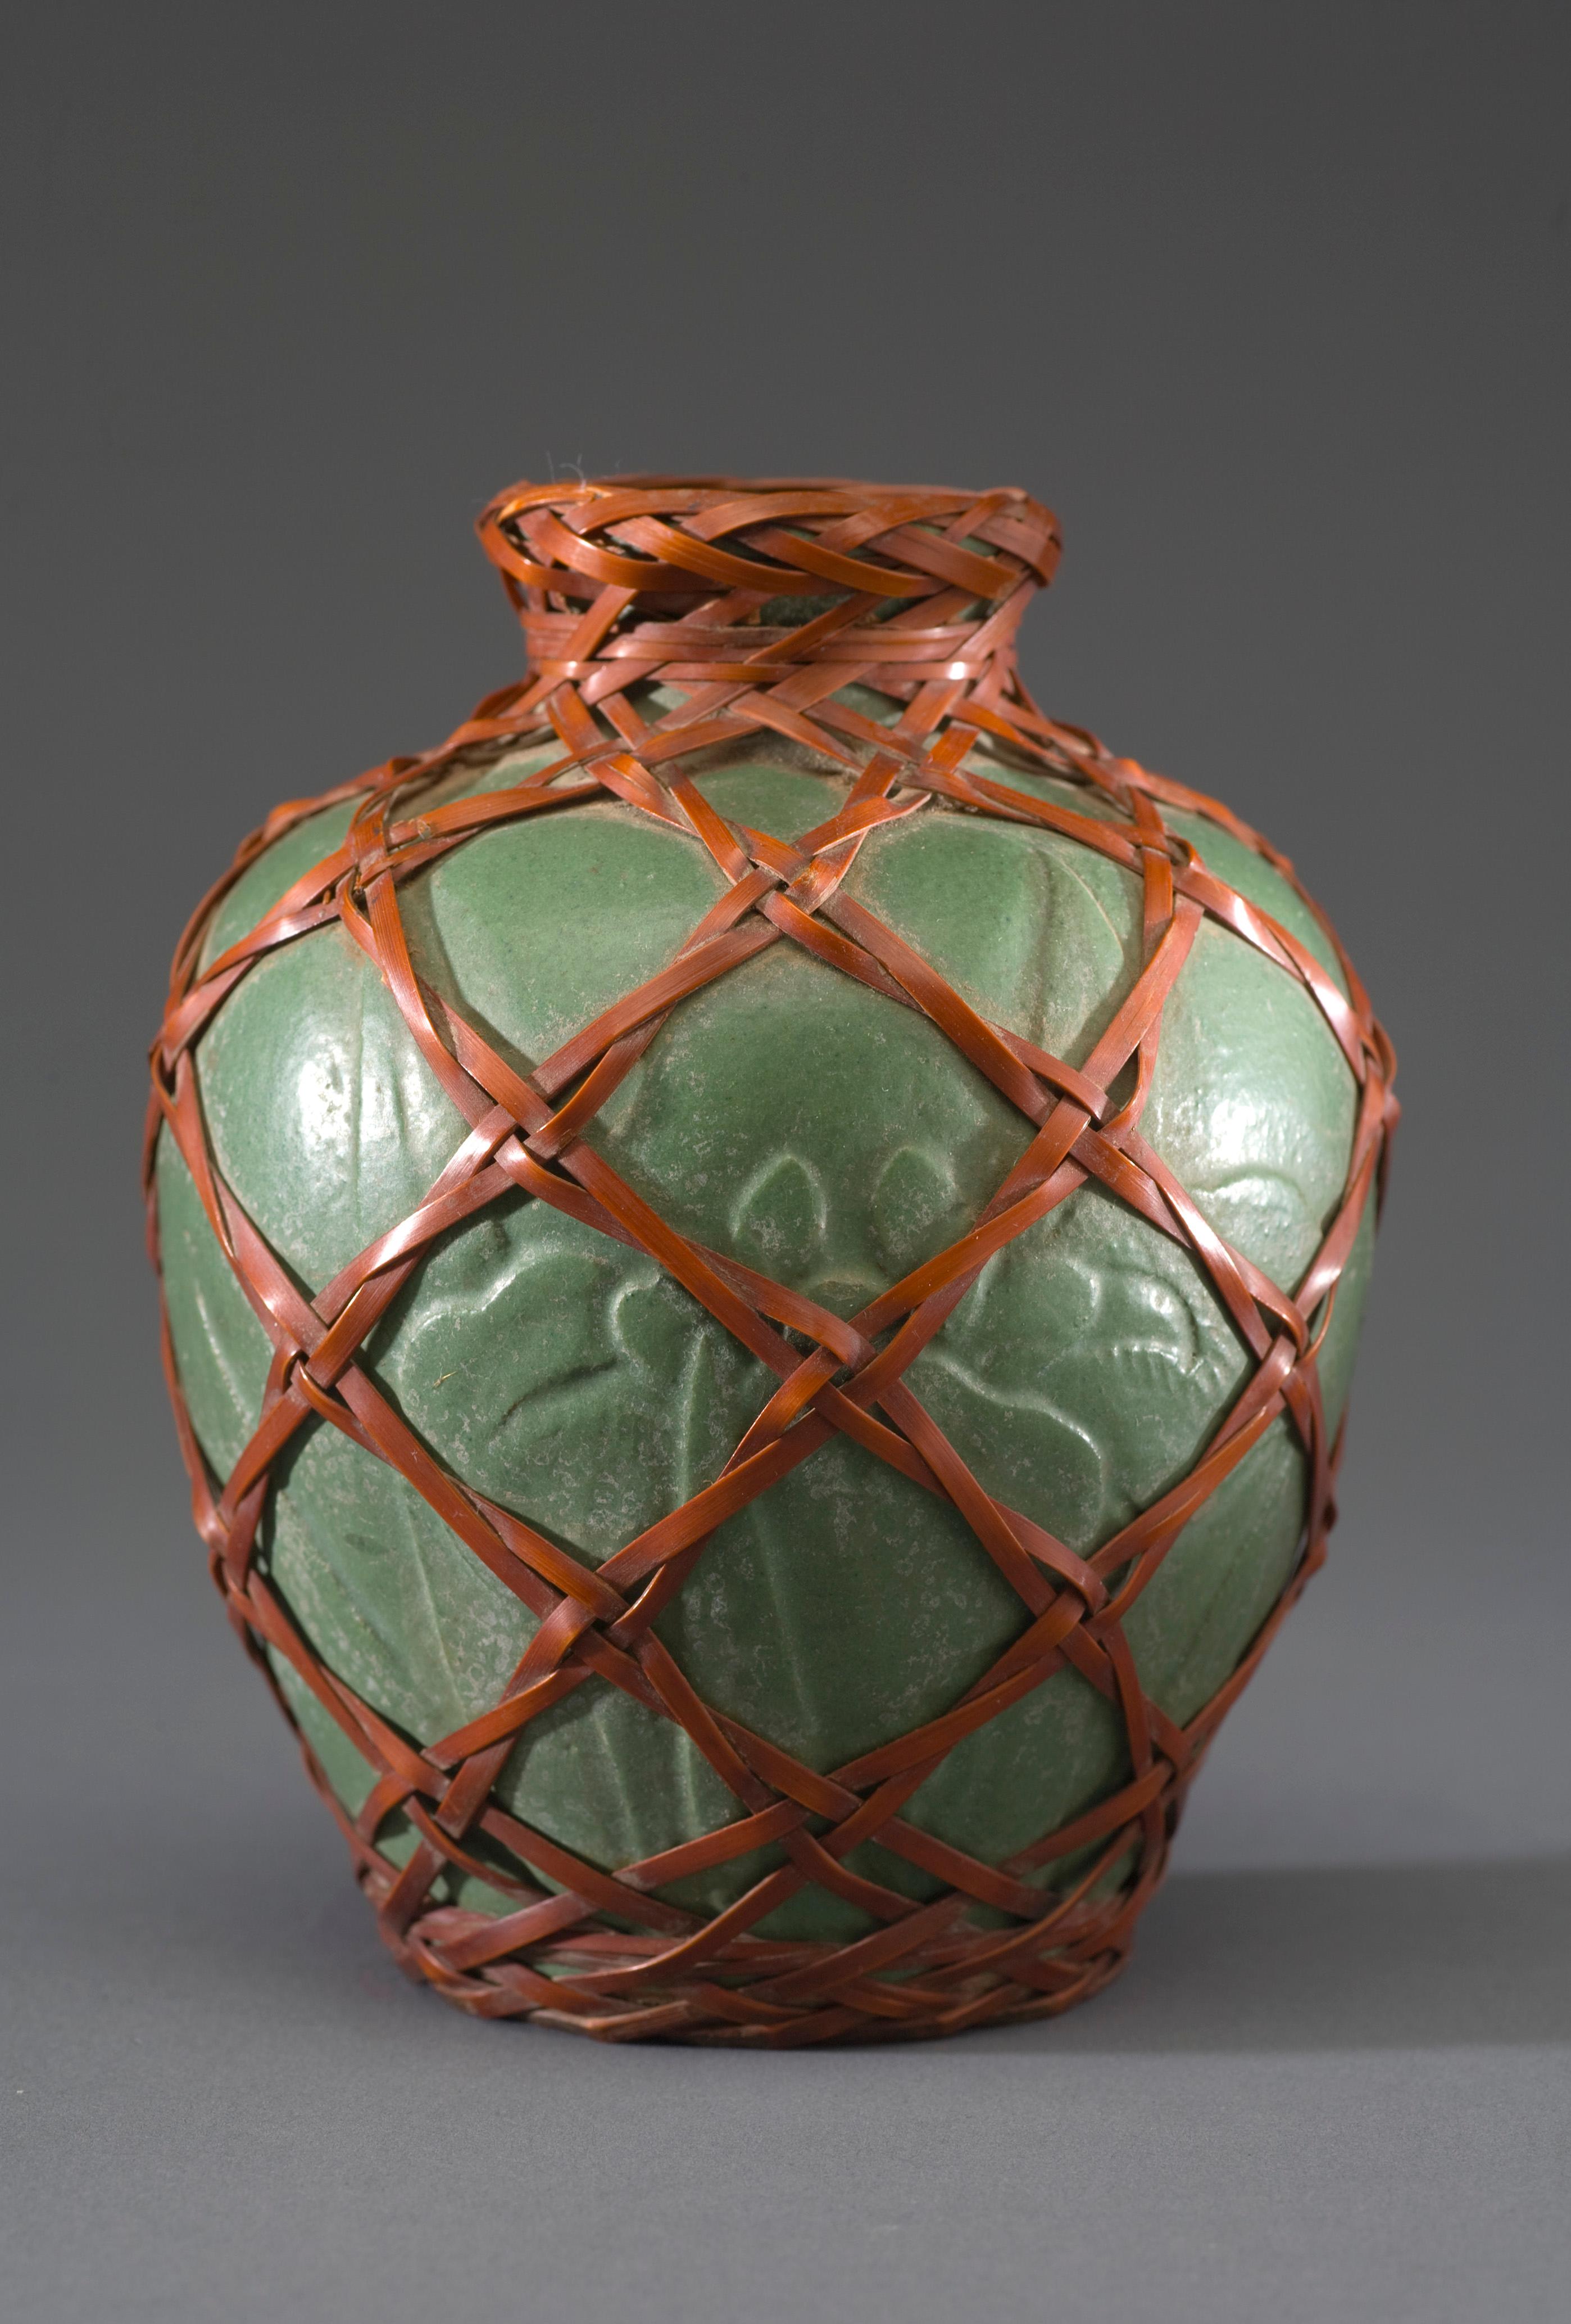 Japanese Aqua Vase with Embedded Floral Design and with Wrapped in Bamboo Weaving

Japanese small Vase with embedded Floral Design and with wrapped Bamboo Weaving. The execution of this Vase is well 